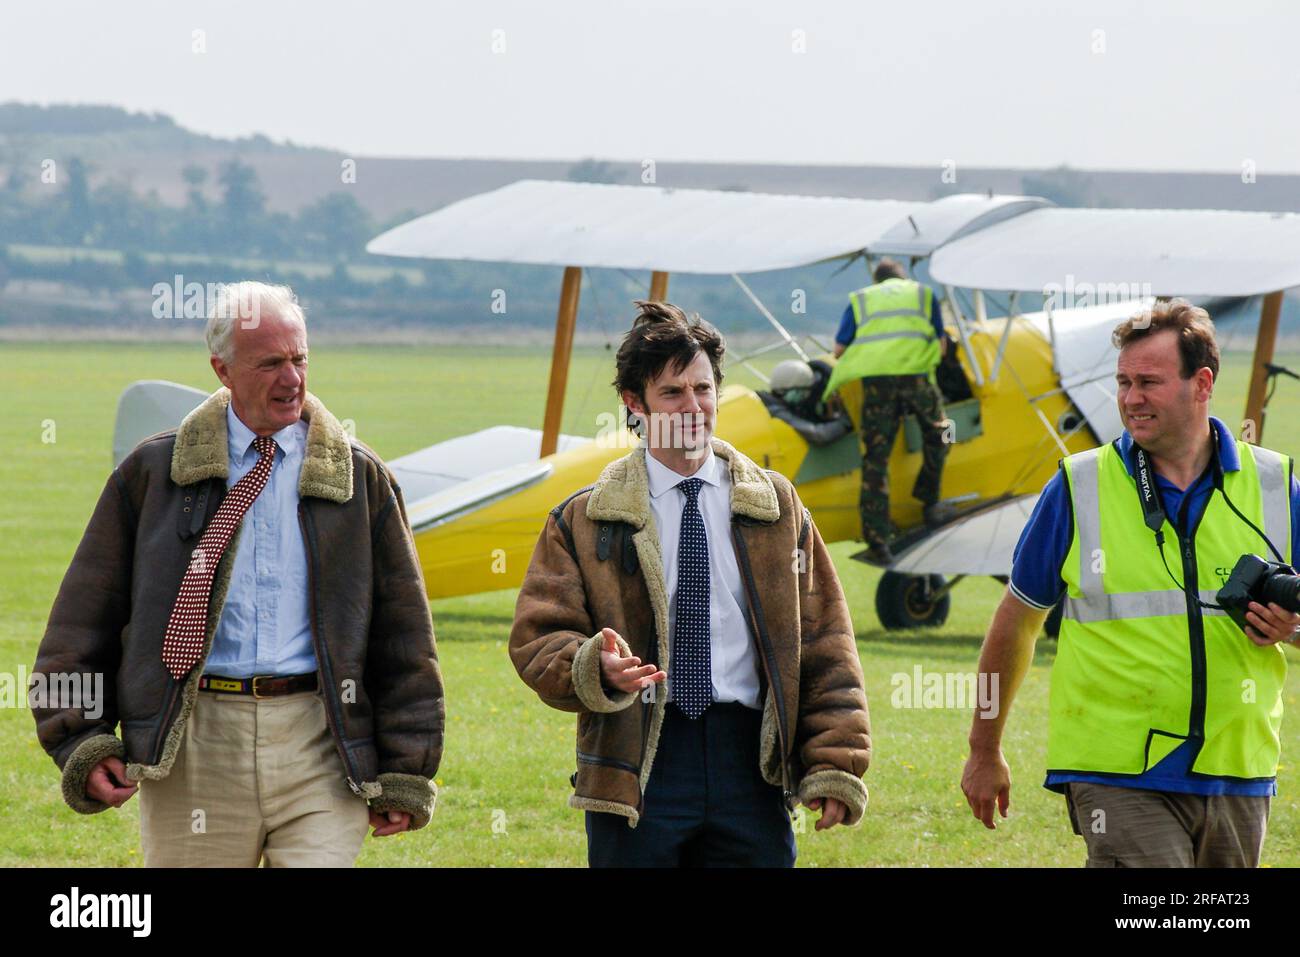 Actor Tom Ward at Duxford, Cambridgeshire, UK, walking back in after a flight in a Classic Wings Tiger Moth biplane. BBC Silent Witness TV star Stock Photo